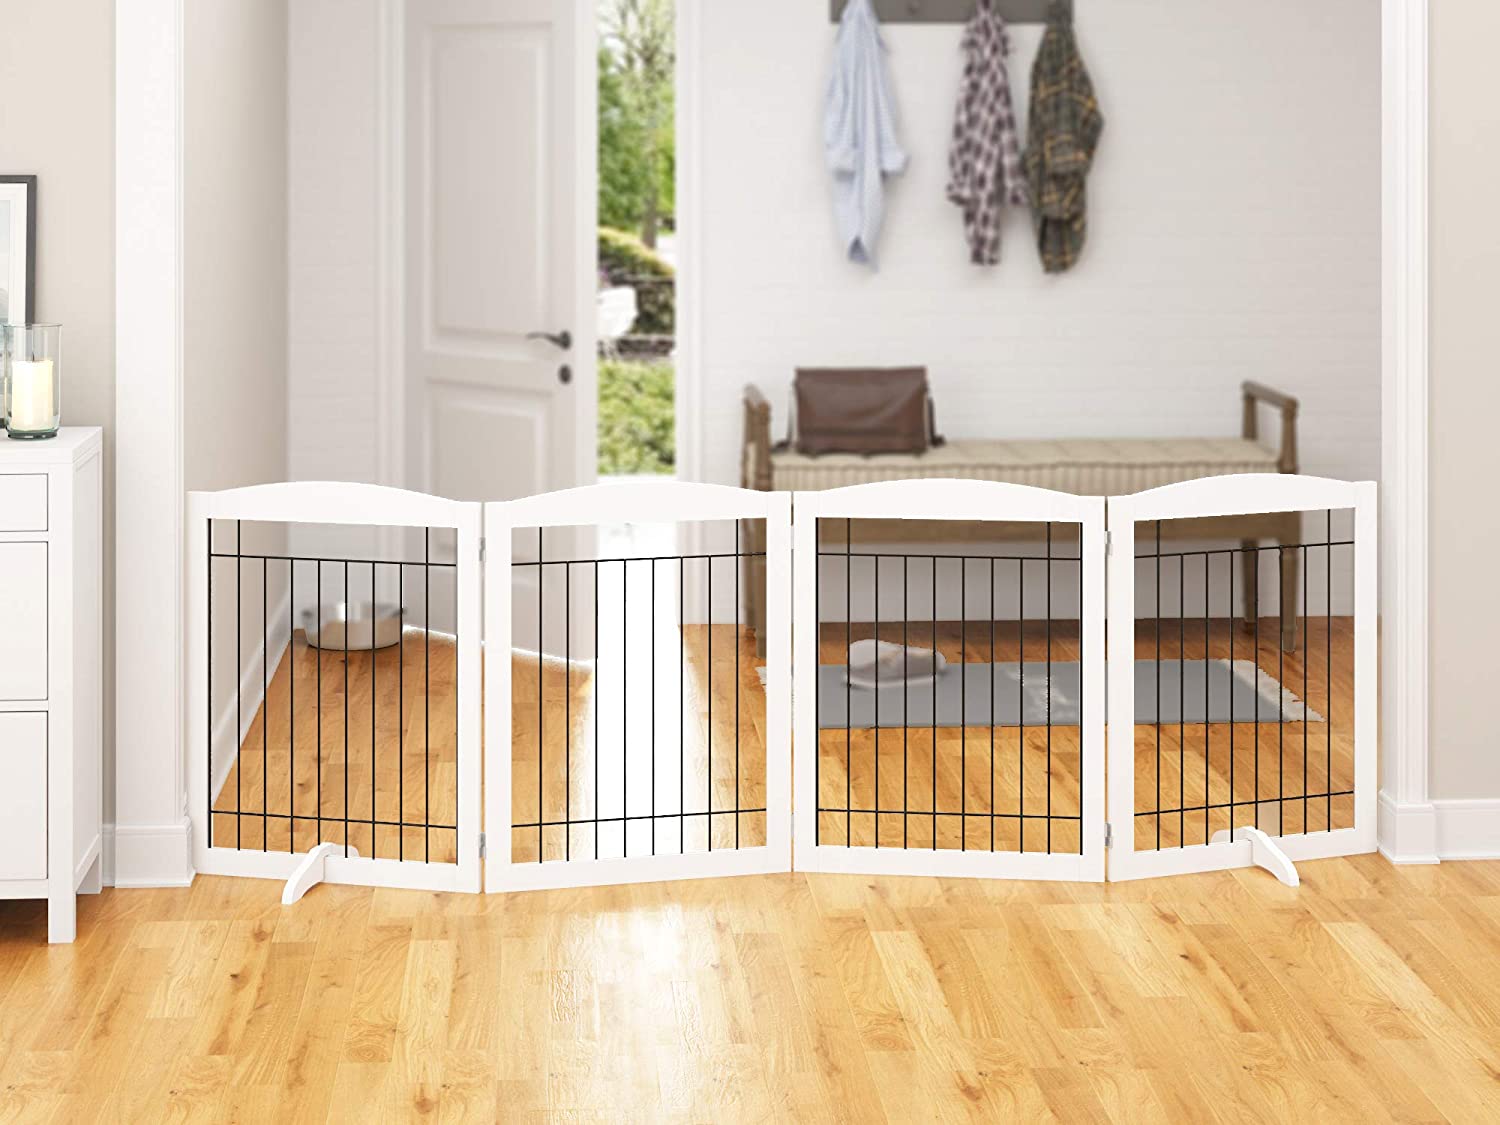 Extra Wide Dog gate for wide areas,doorway stairs,free standing foldable wooden pet gate,96 inch wide 30 inches tall The Pimp Your Pets Store